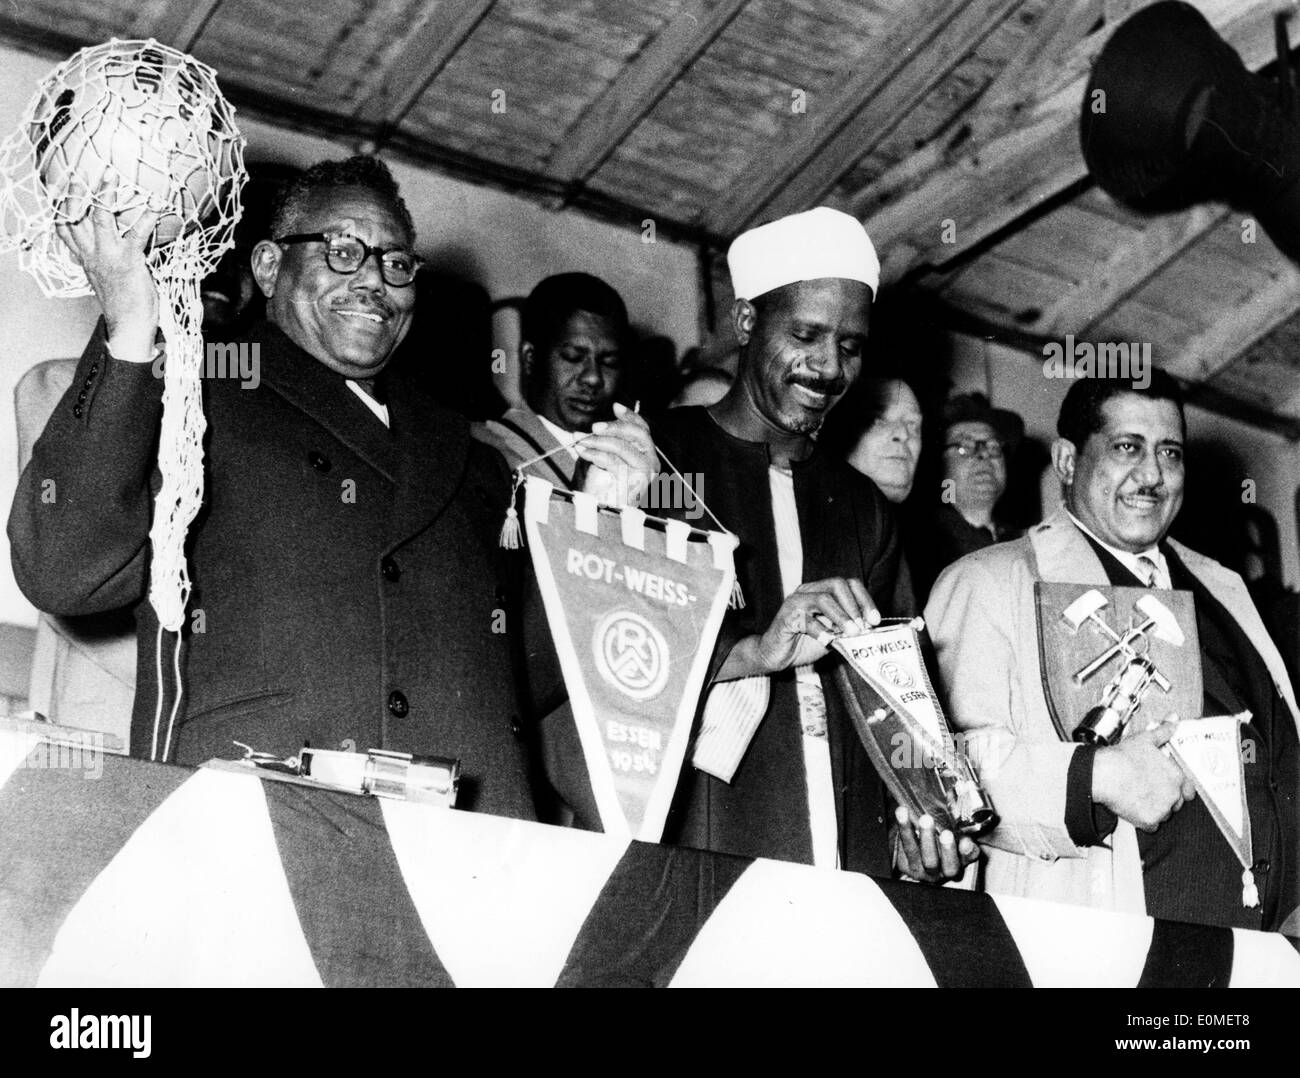 Nov 25, 1954; Essen, Germany; The President of Sudan ISMAIL EL-AZHARI was very interested on football during his visit in Germany. He went to watch a footbal game of the 'Rot-Weiss' (Red-White) Essen team, in Essen. The picture shows, President ISMAIL EL-AZHARI, ALI ABDEL-RAHMAN and the Minister of Social Affairs, YAHIA EL-FADLI at the tribunes of the stadium during the football game in Essen. Stock Photo